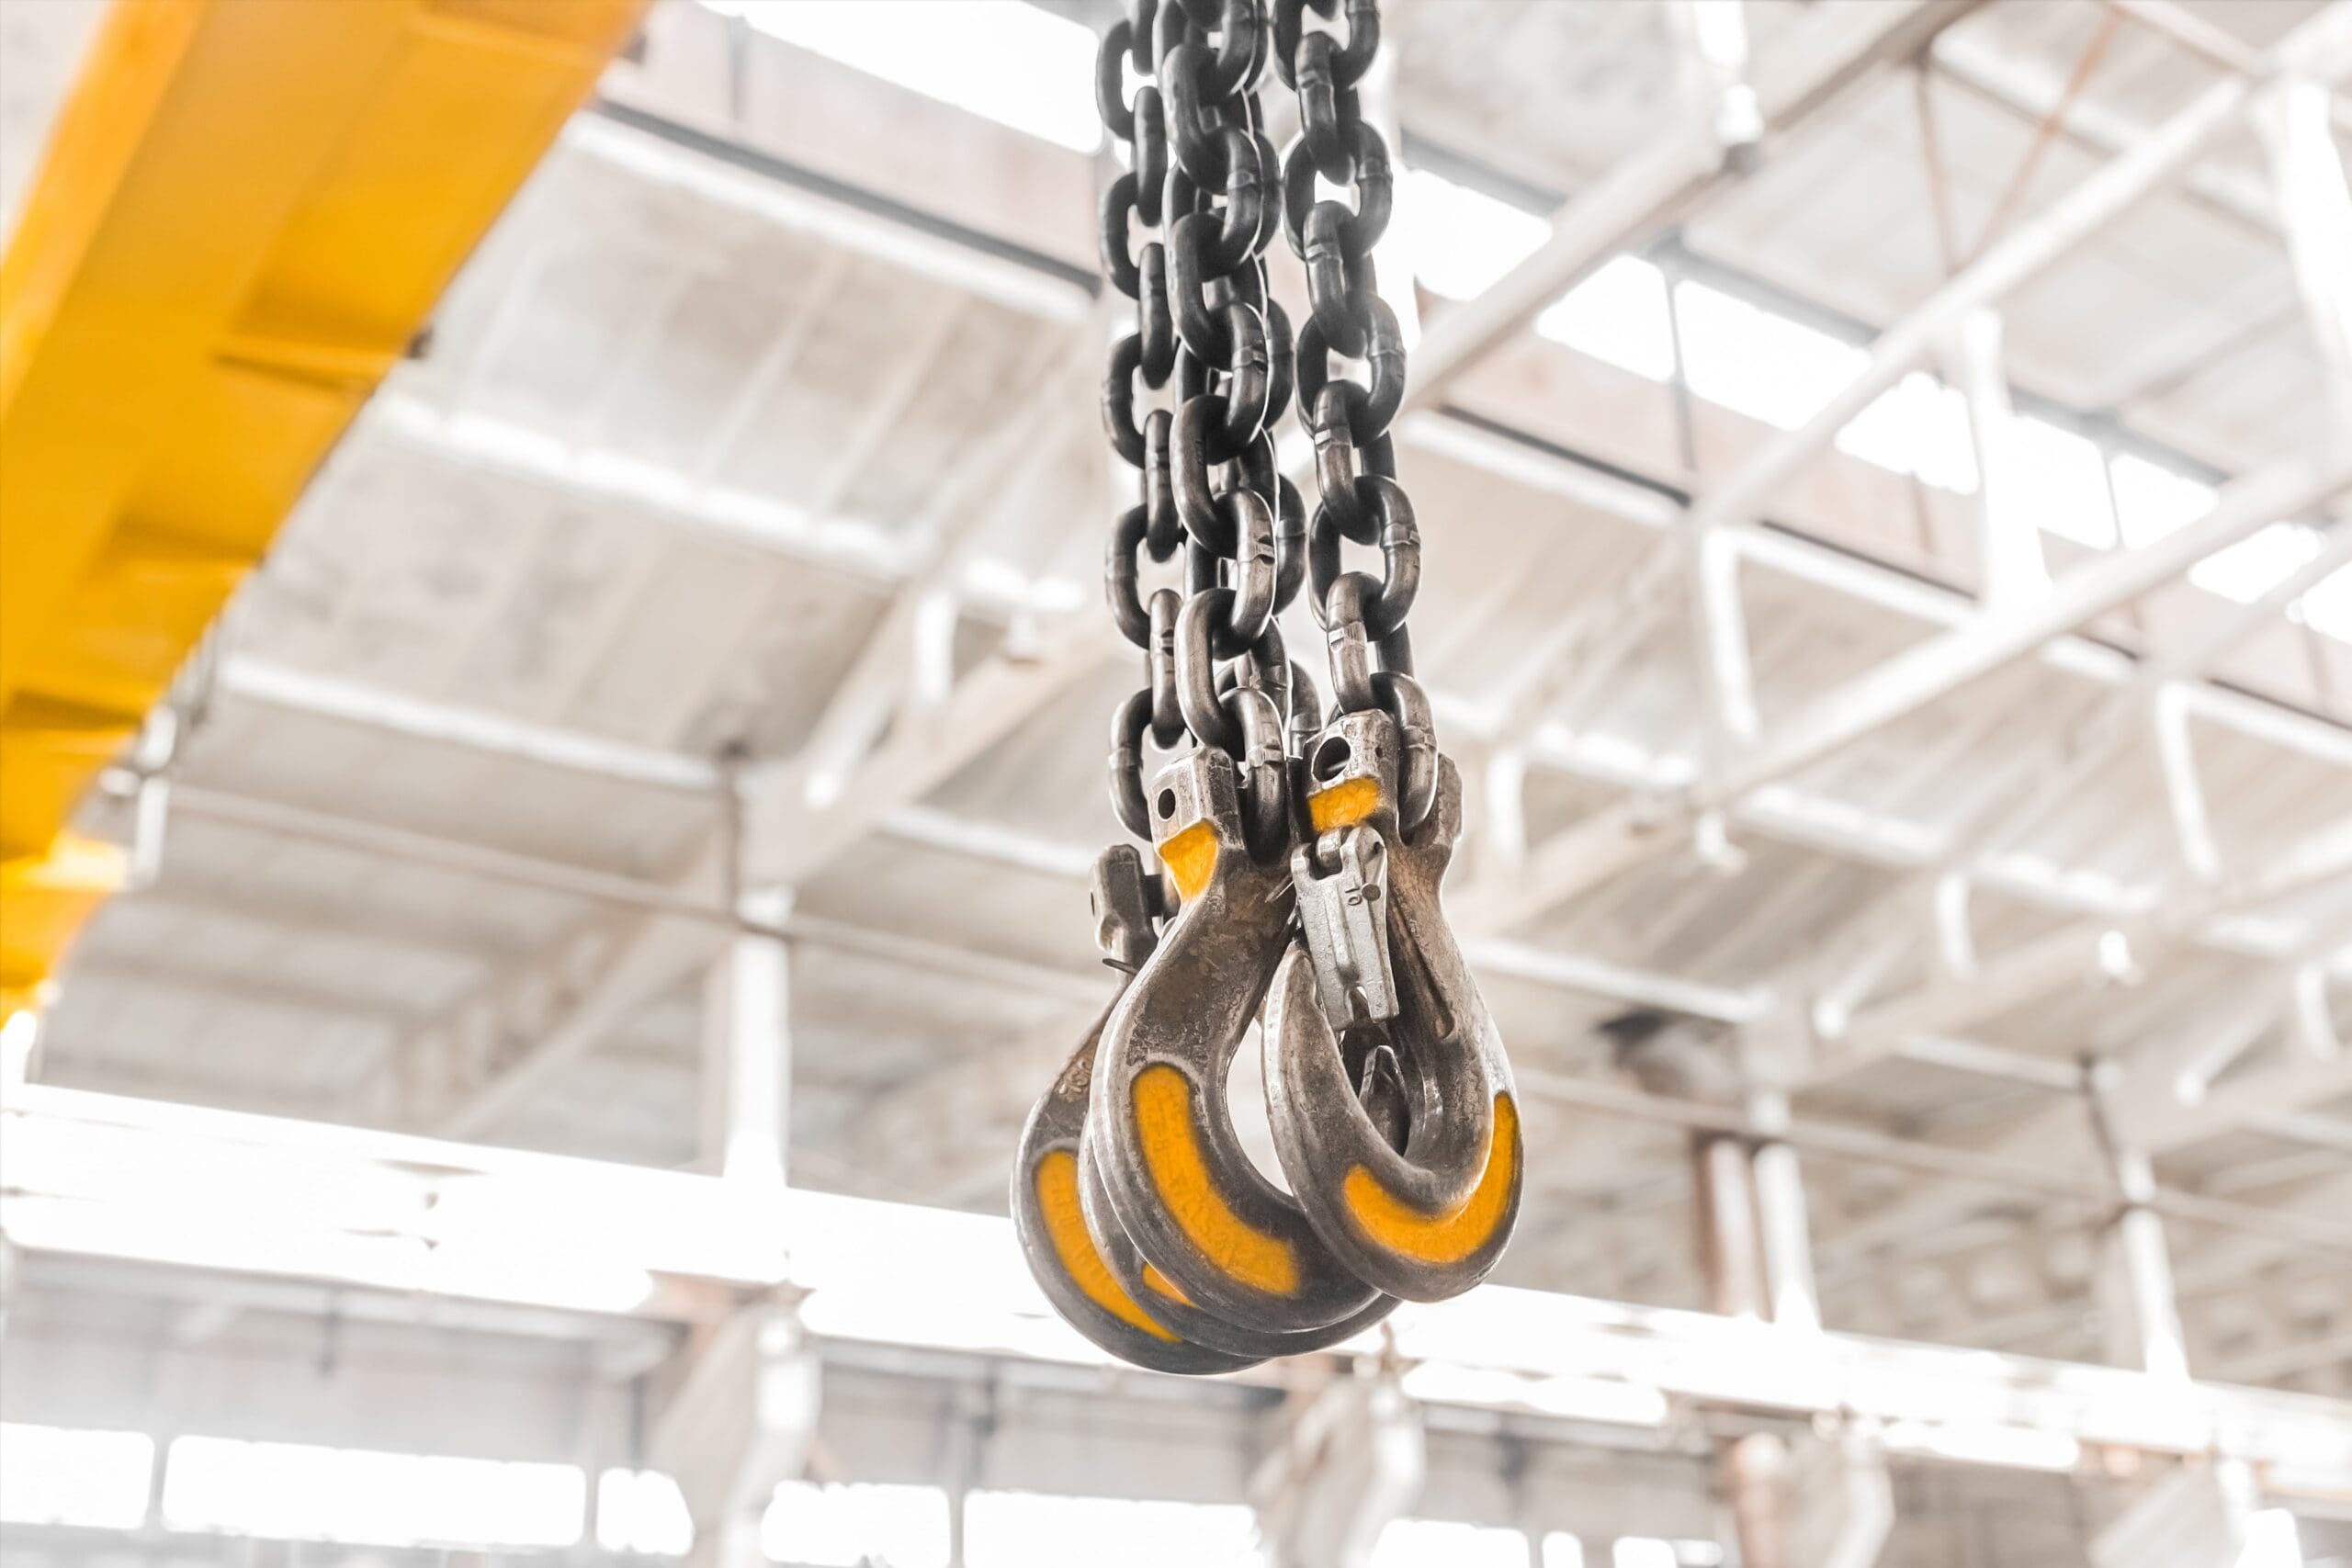 A close up image of hooks hanging from a crane in a factory